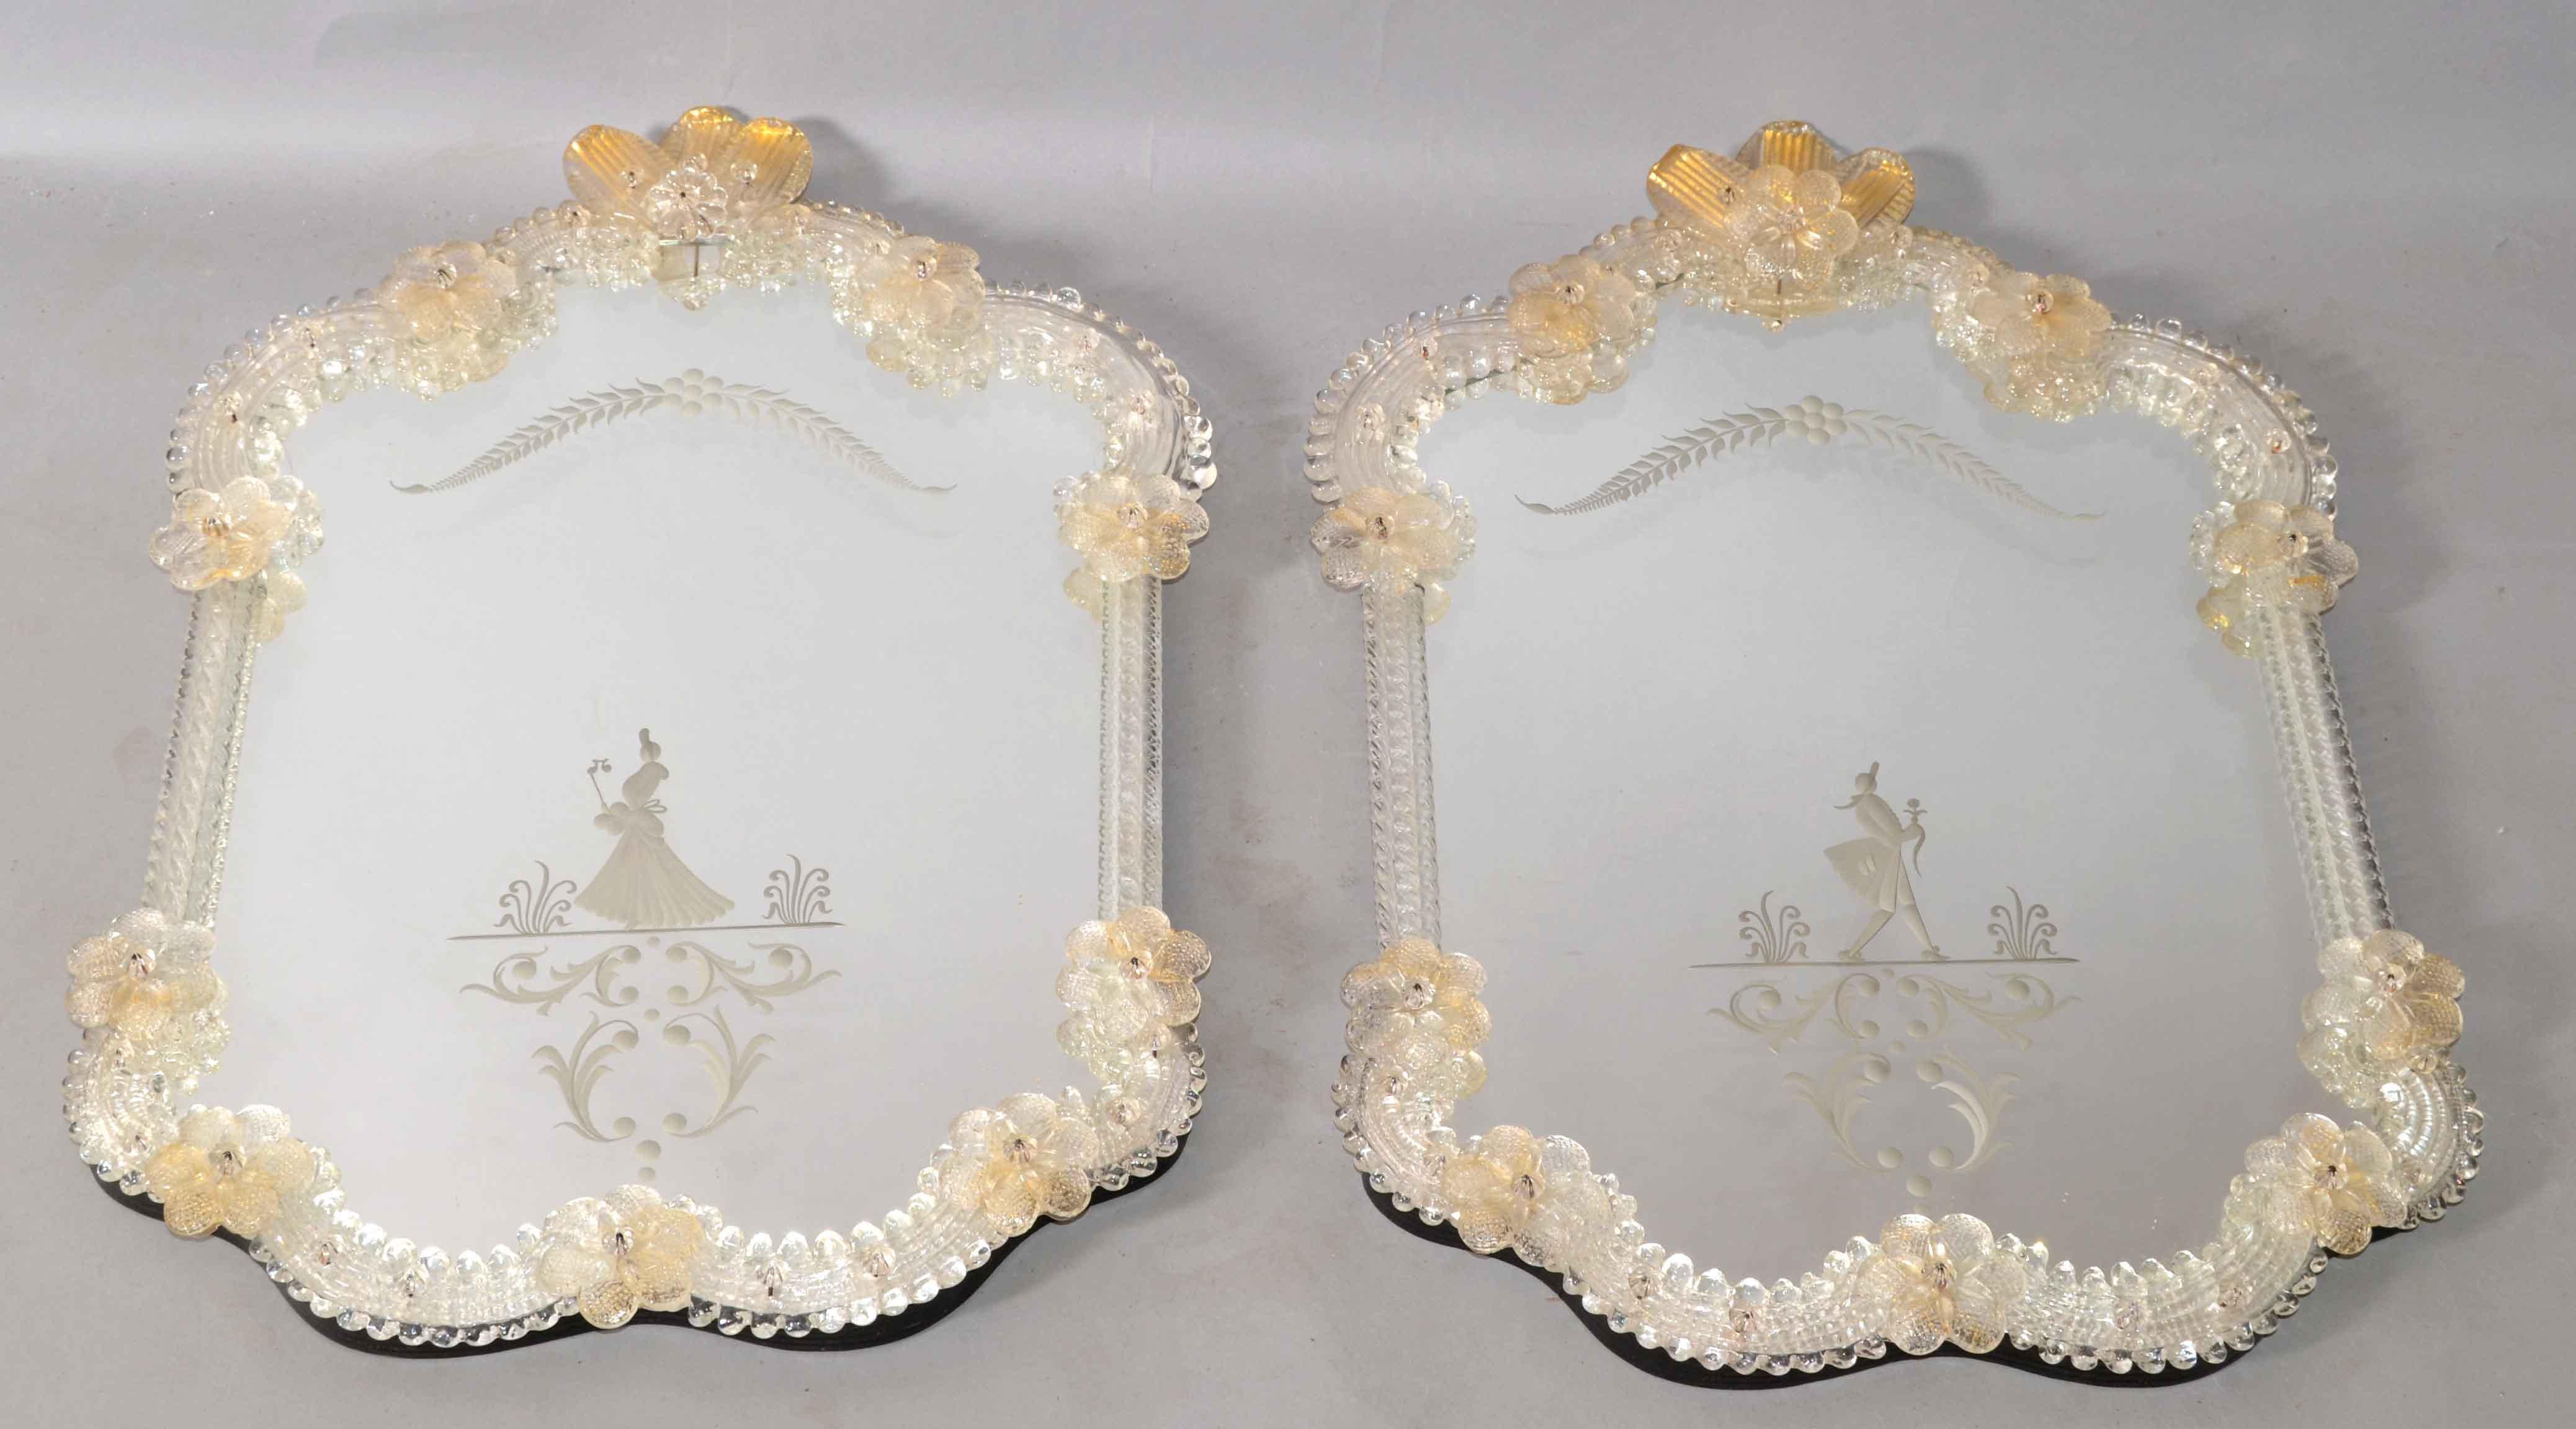 Rococo Revival Him and Her Etched Venetian Wall Mirror Bohemian Golden Flowers In Good Condition For Sale In Miami, FL